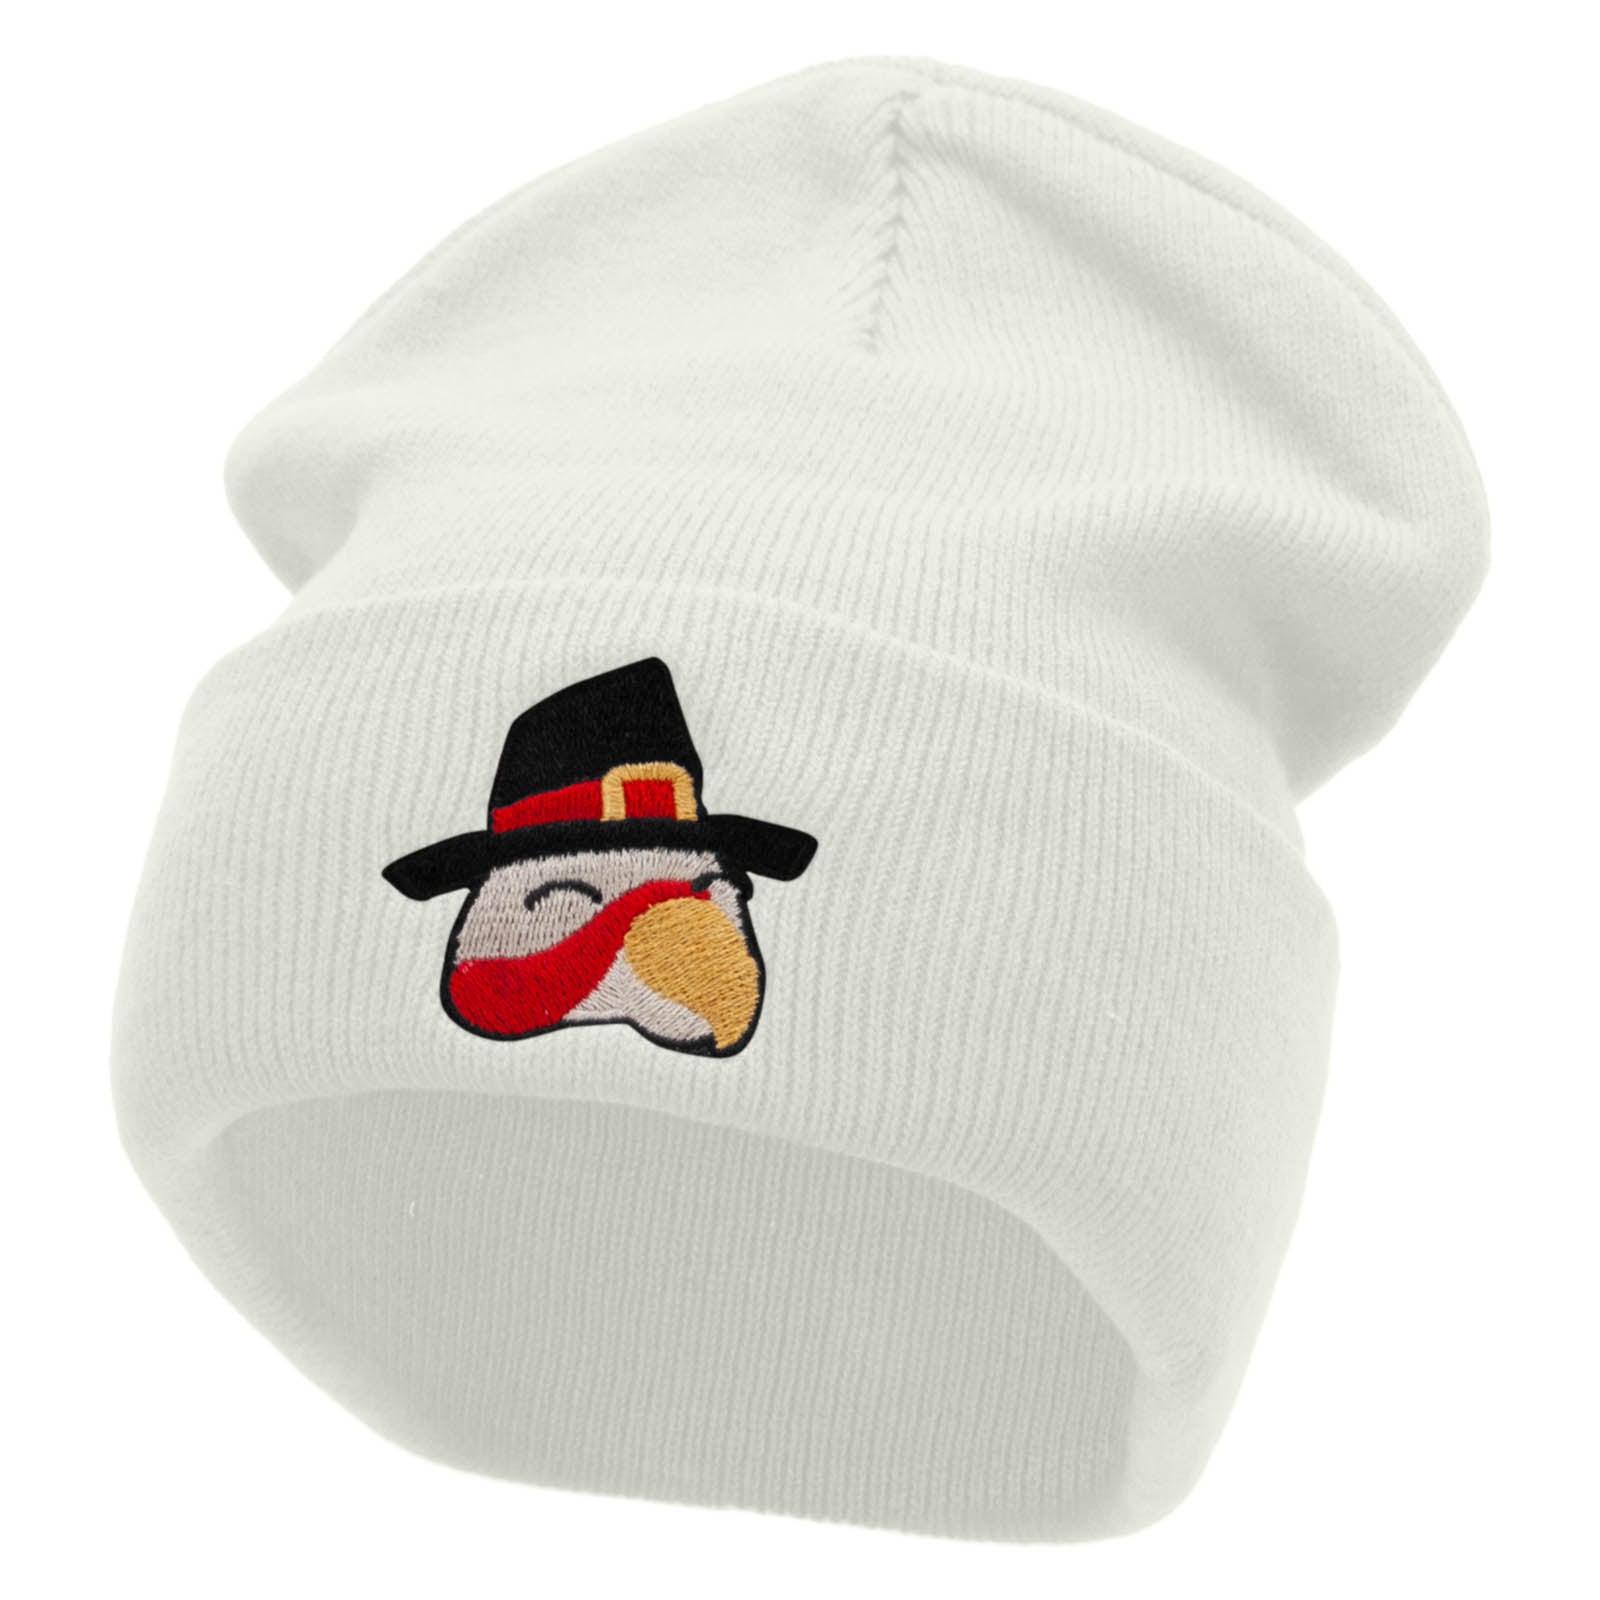 Turkey Head Embroidered 12 Inch Long Knitted Beanie - White OSFM